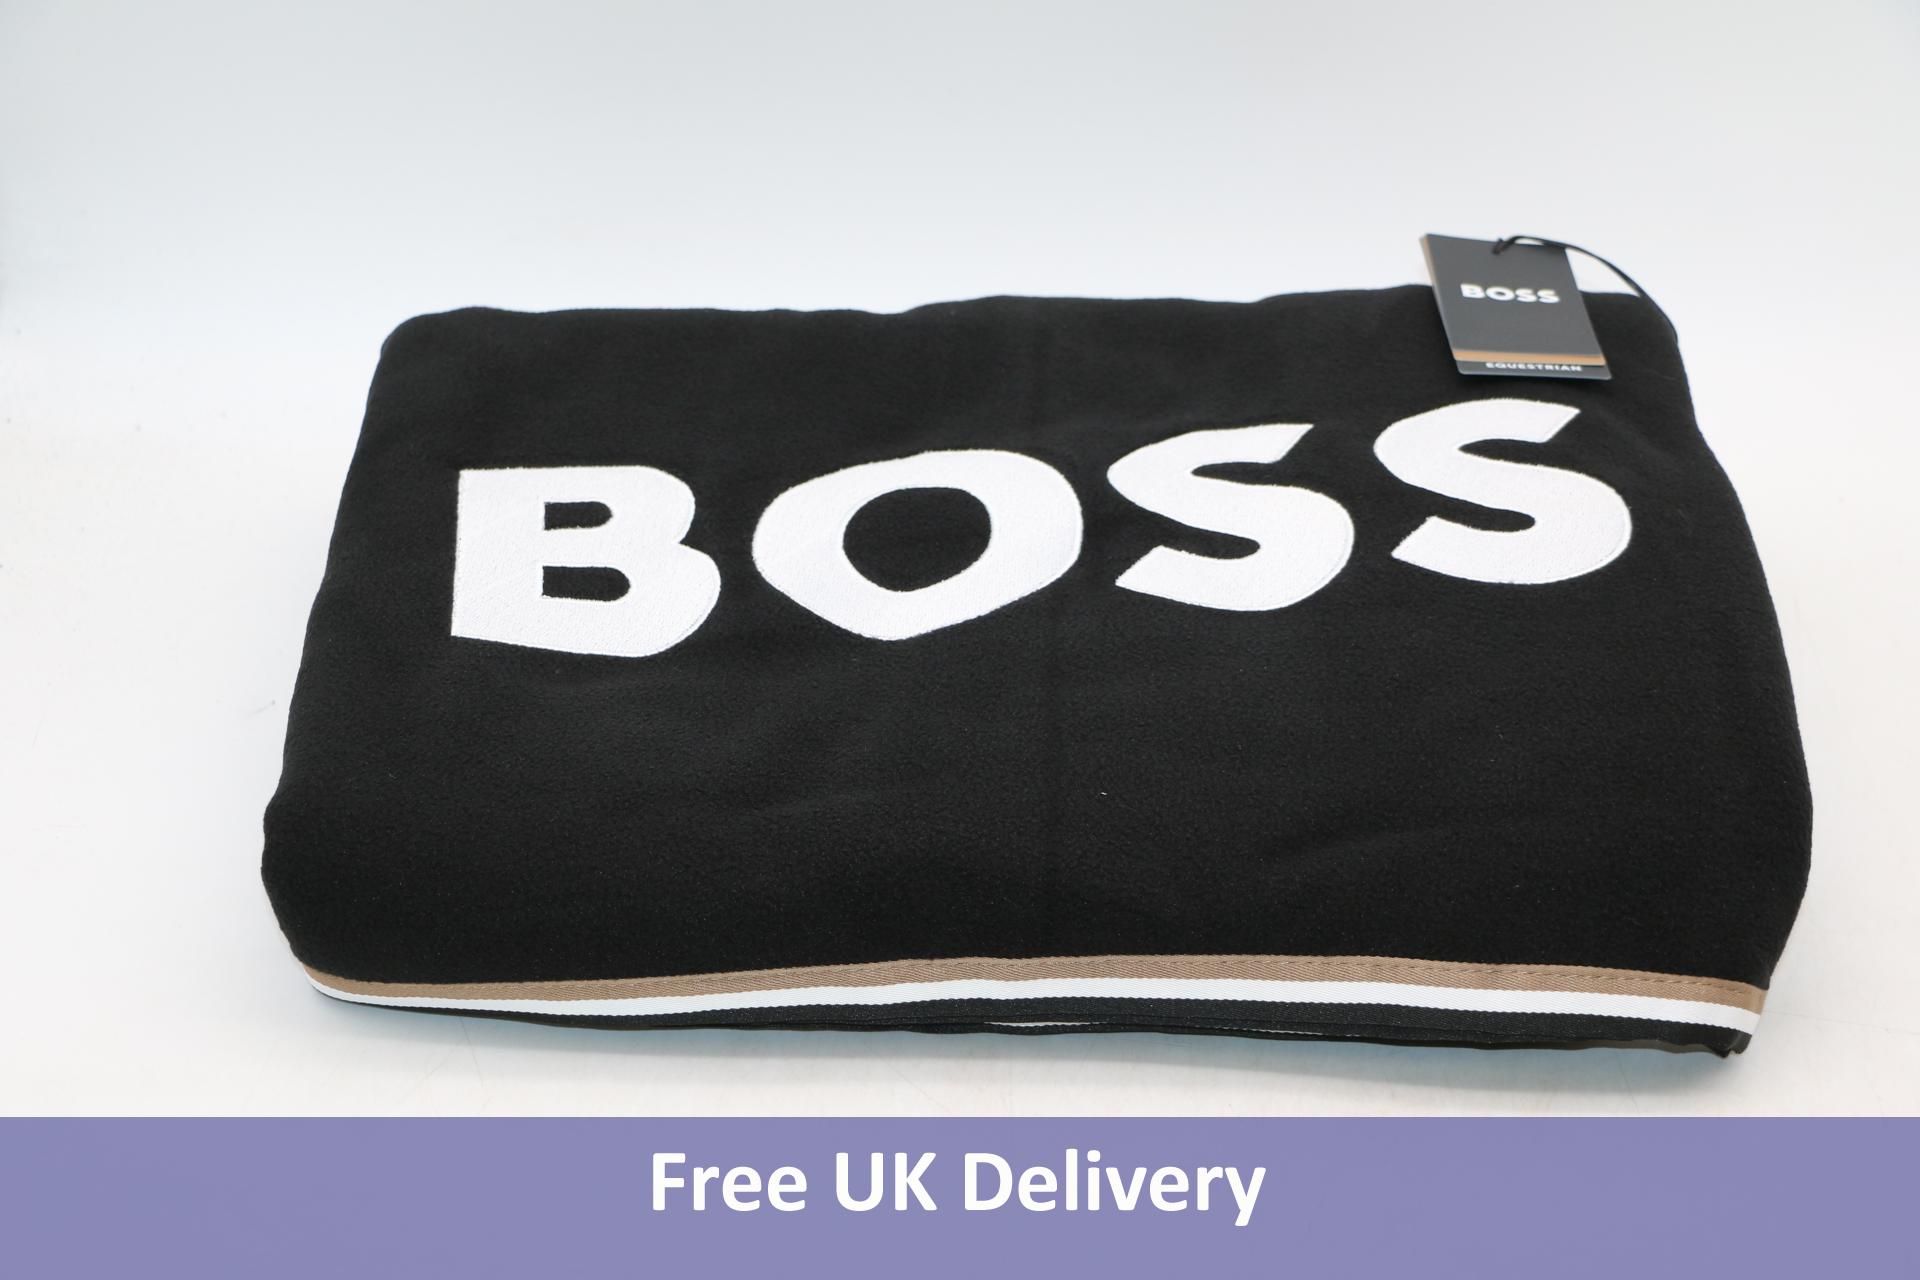 Boss Equestrian Fleece Fast-drying Sweat Rug with contrast logo, Black, Size 60